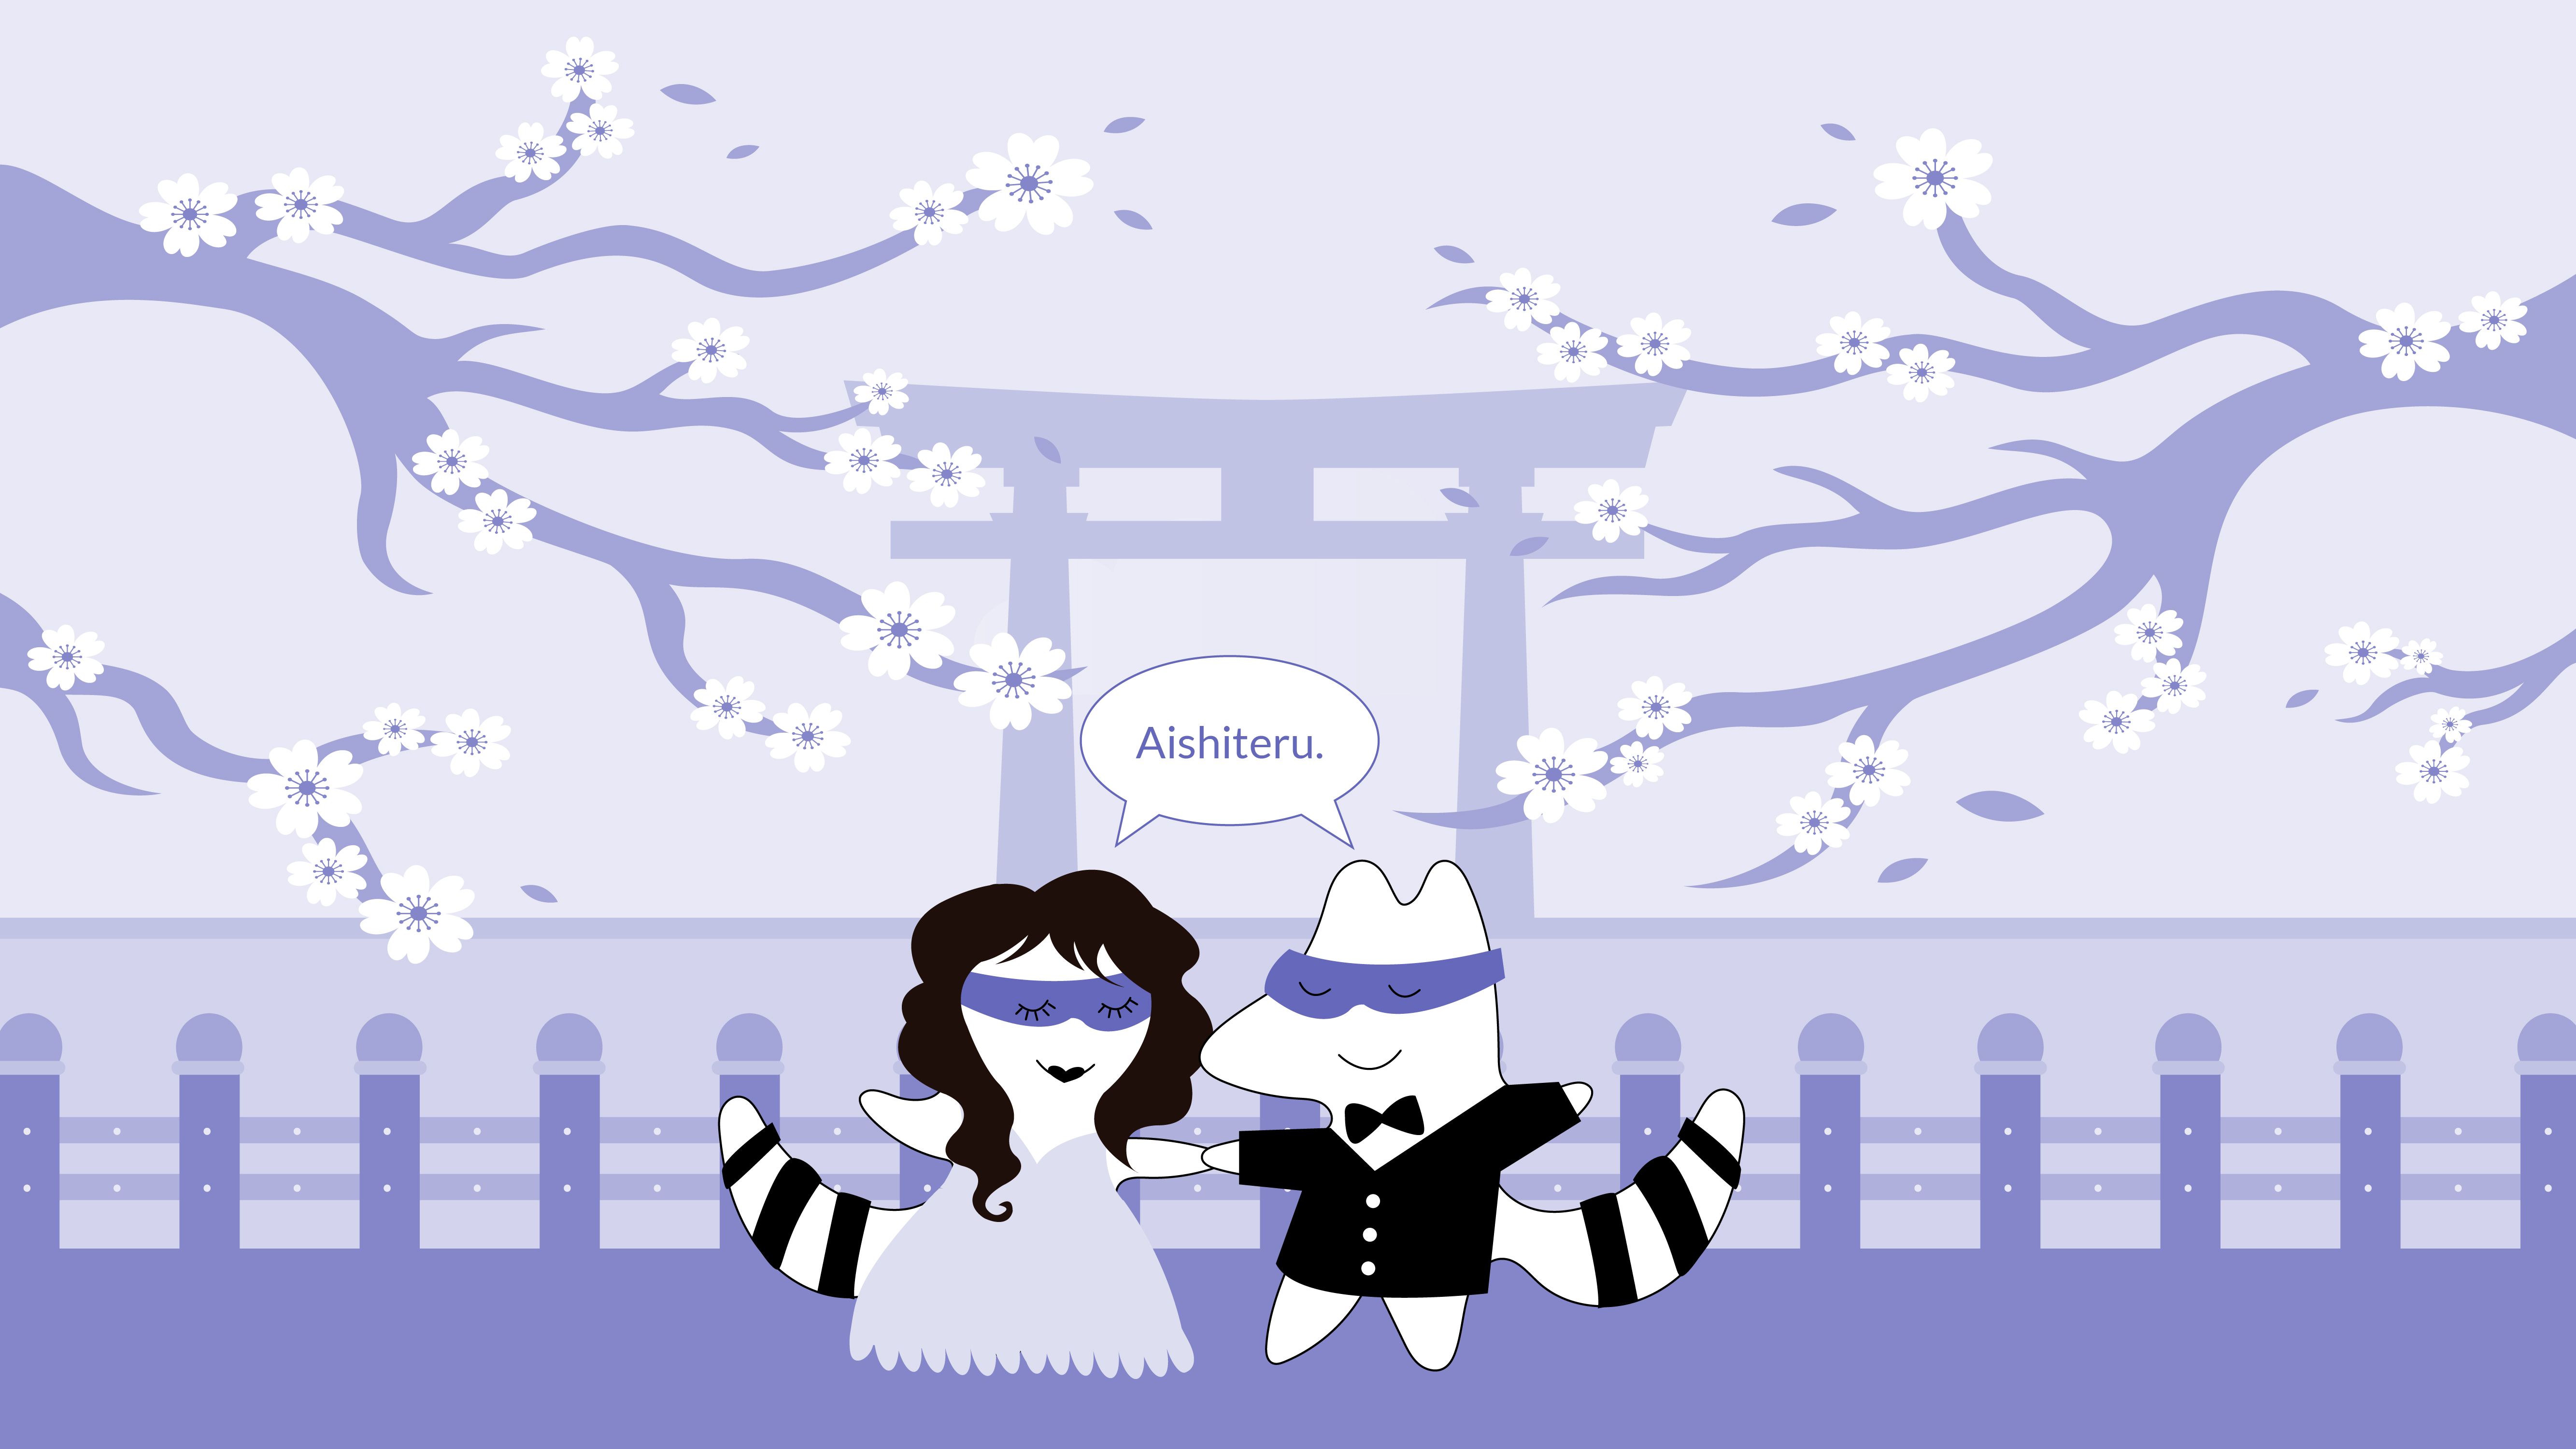 Benji and Iggy are getting married in Japan under the blooming sakura, saying “Aishiteru” to each other.